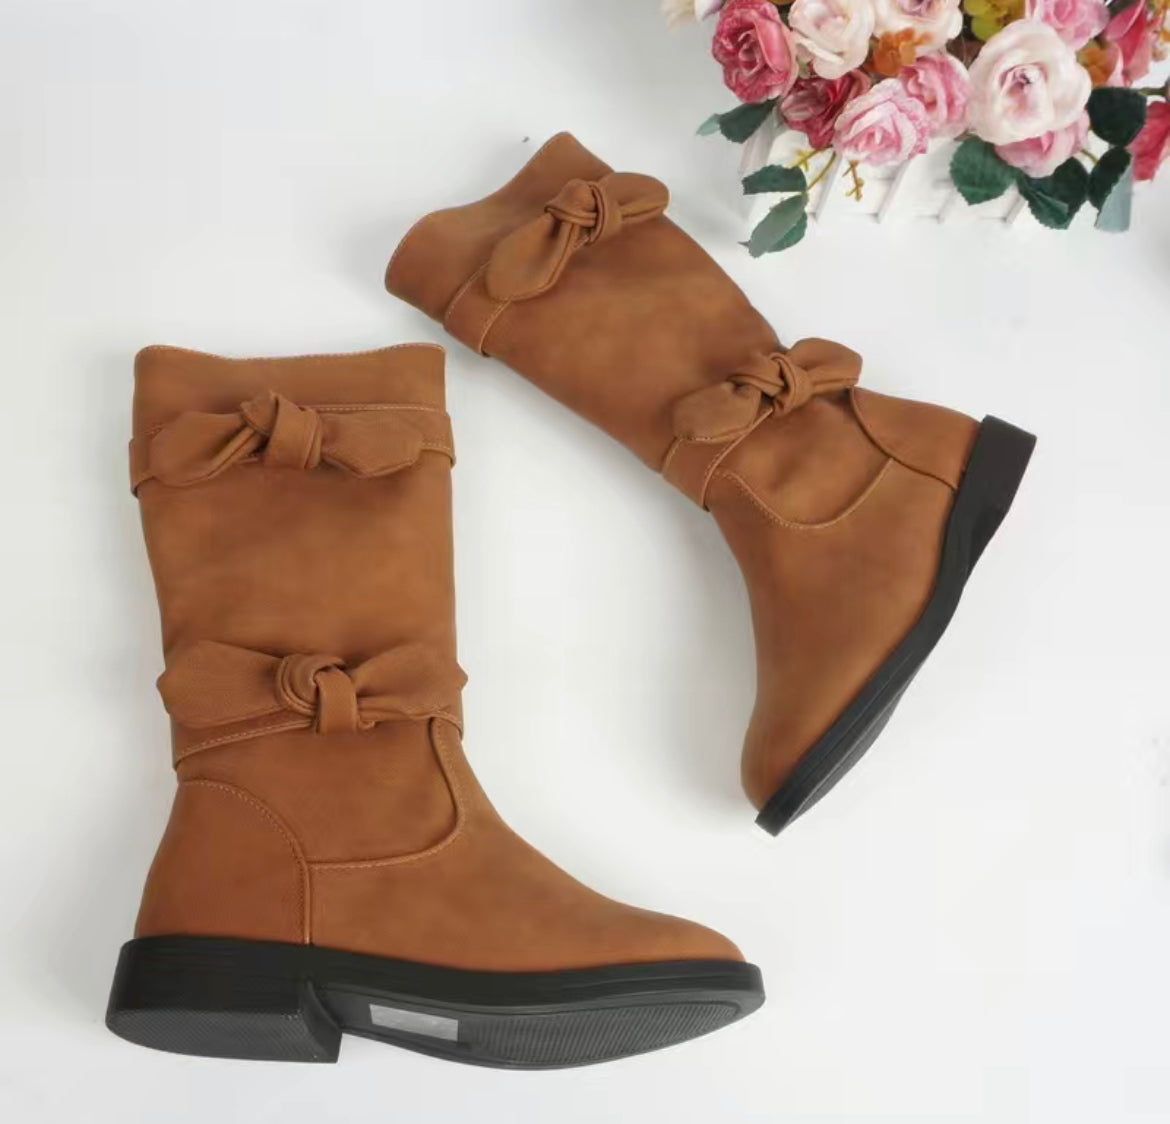 Bows & Leather Girl Boots